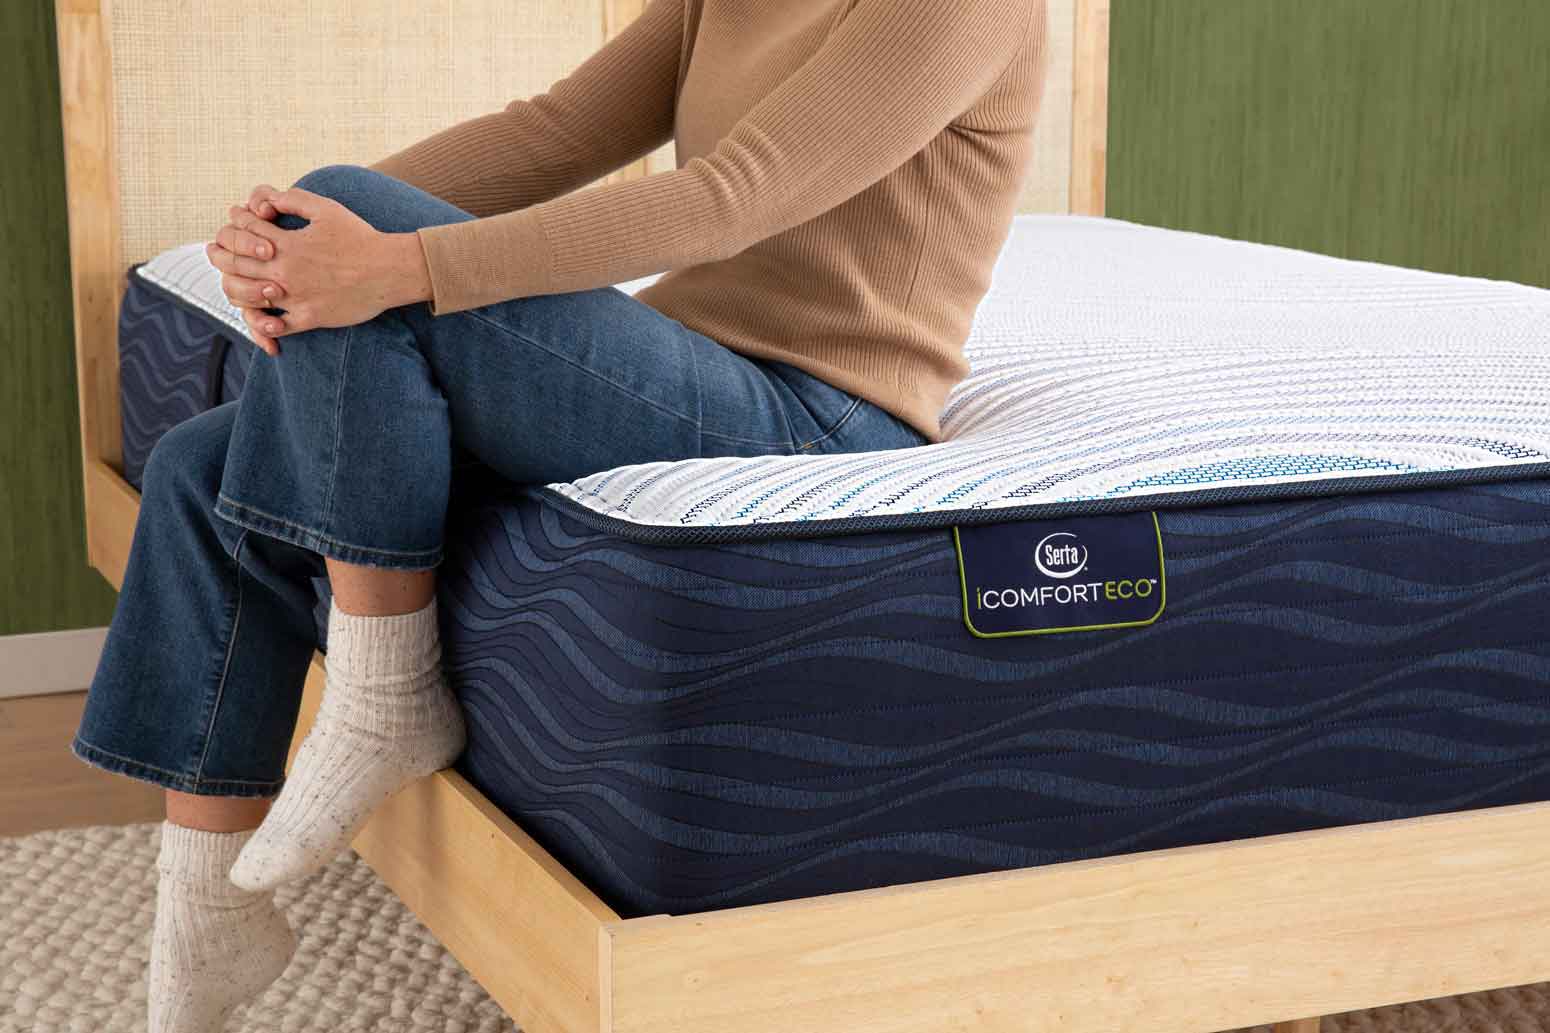 What You Need To Know About The Serta iComfort ECO Mattress